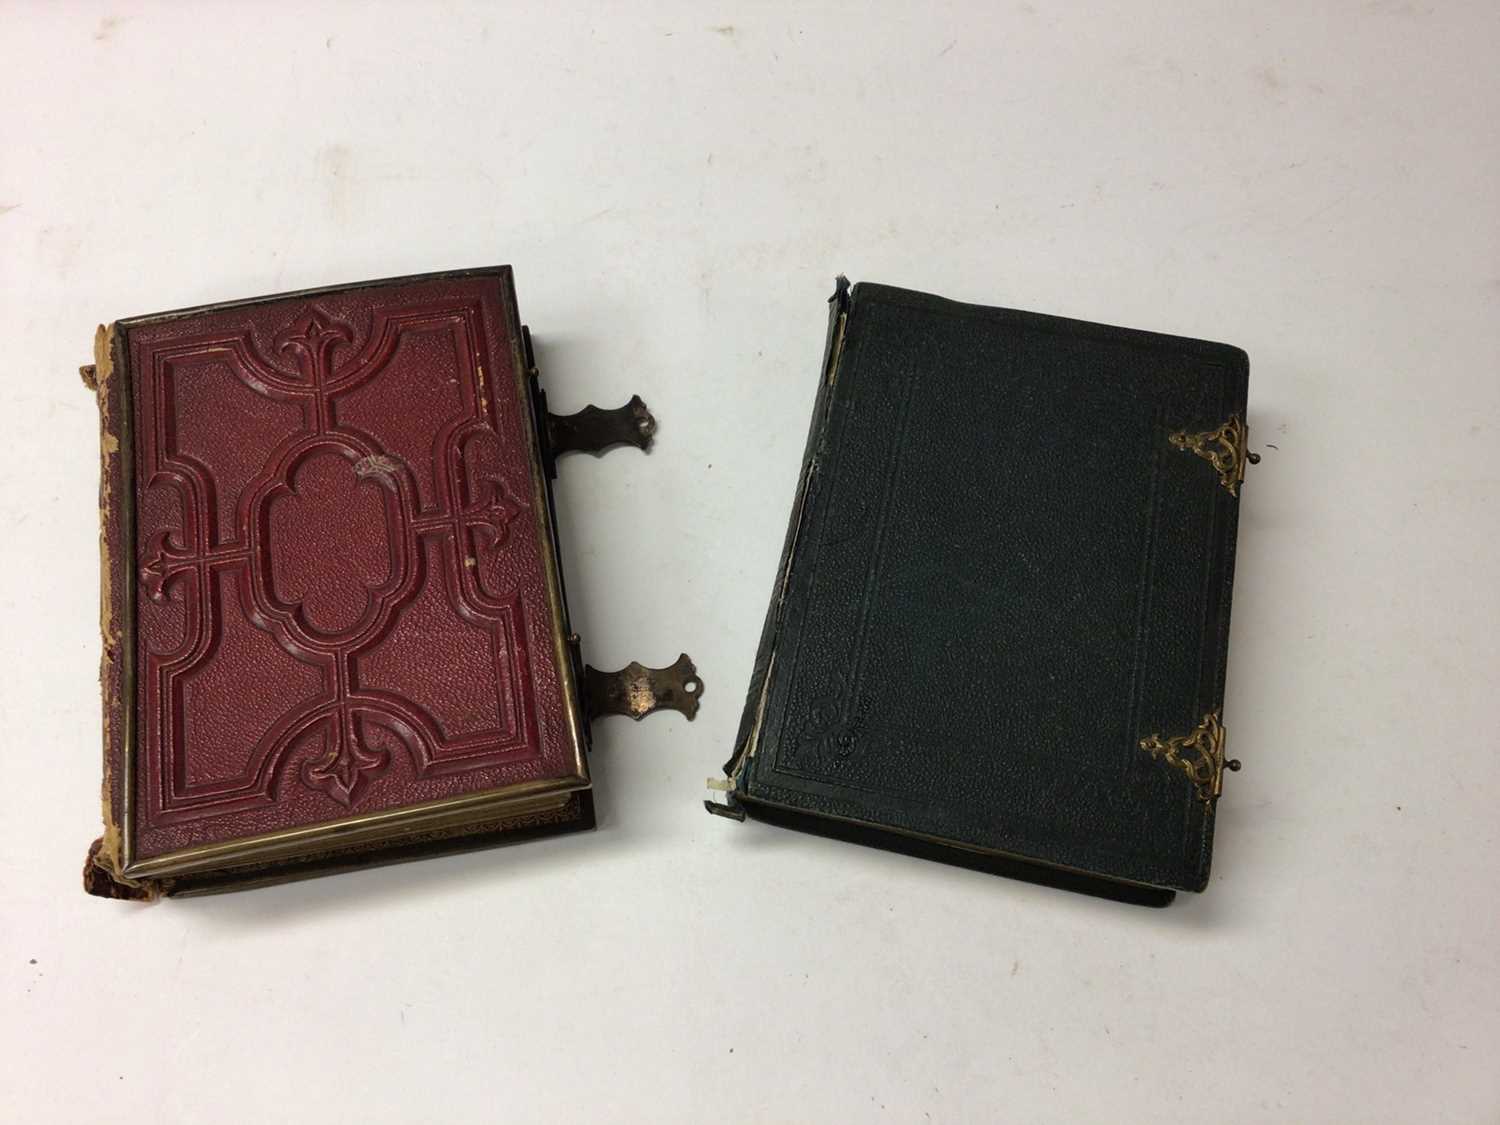 Lot 1443 - Two small Victorian photograph albums from 1862 with paper notes & write up.  Photographs of The Honourable Lewis Wingfield.